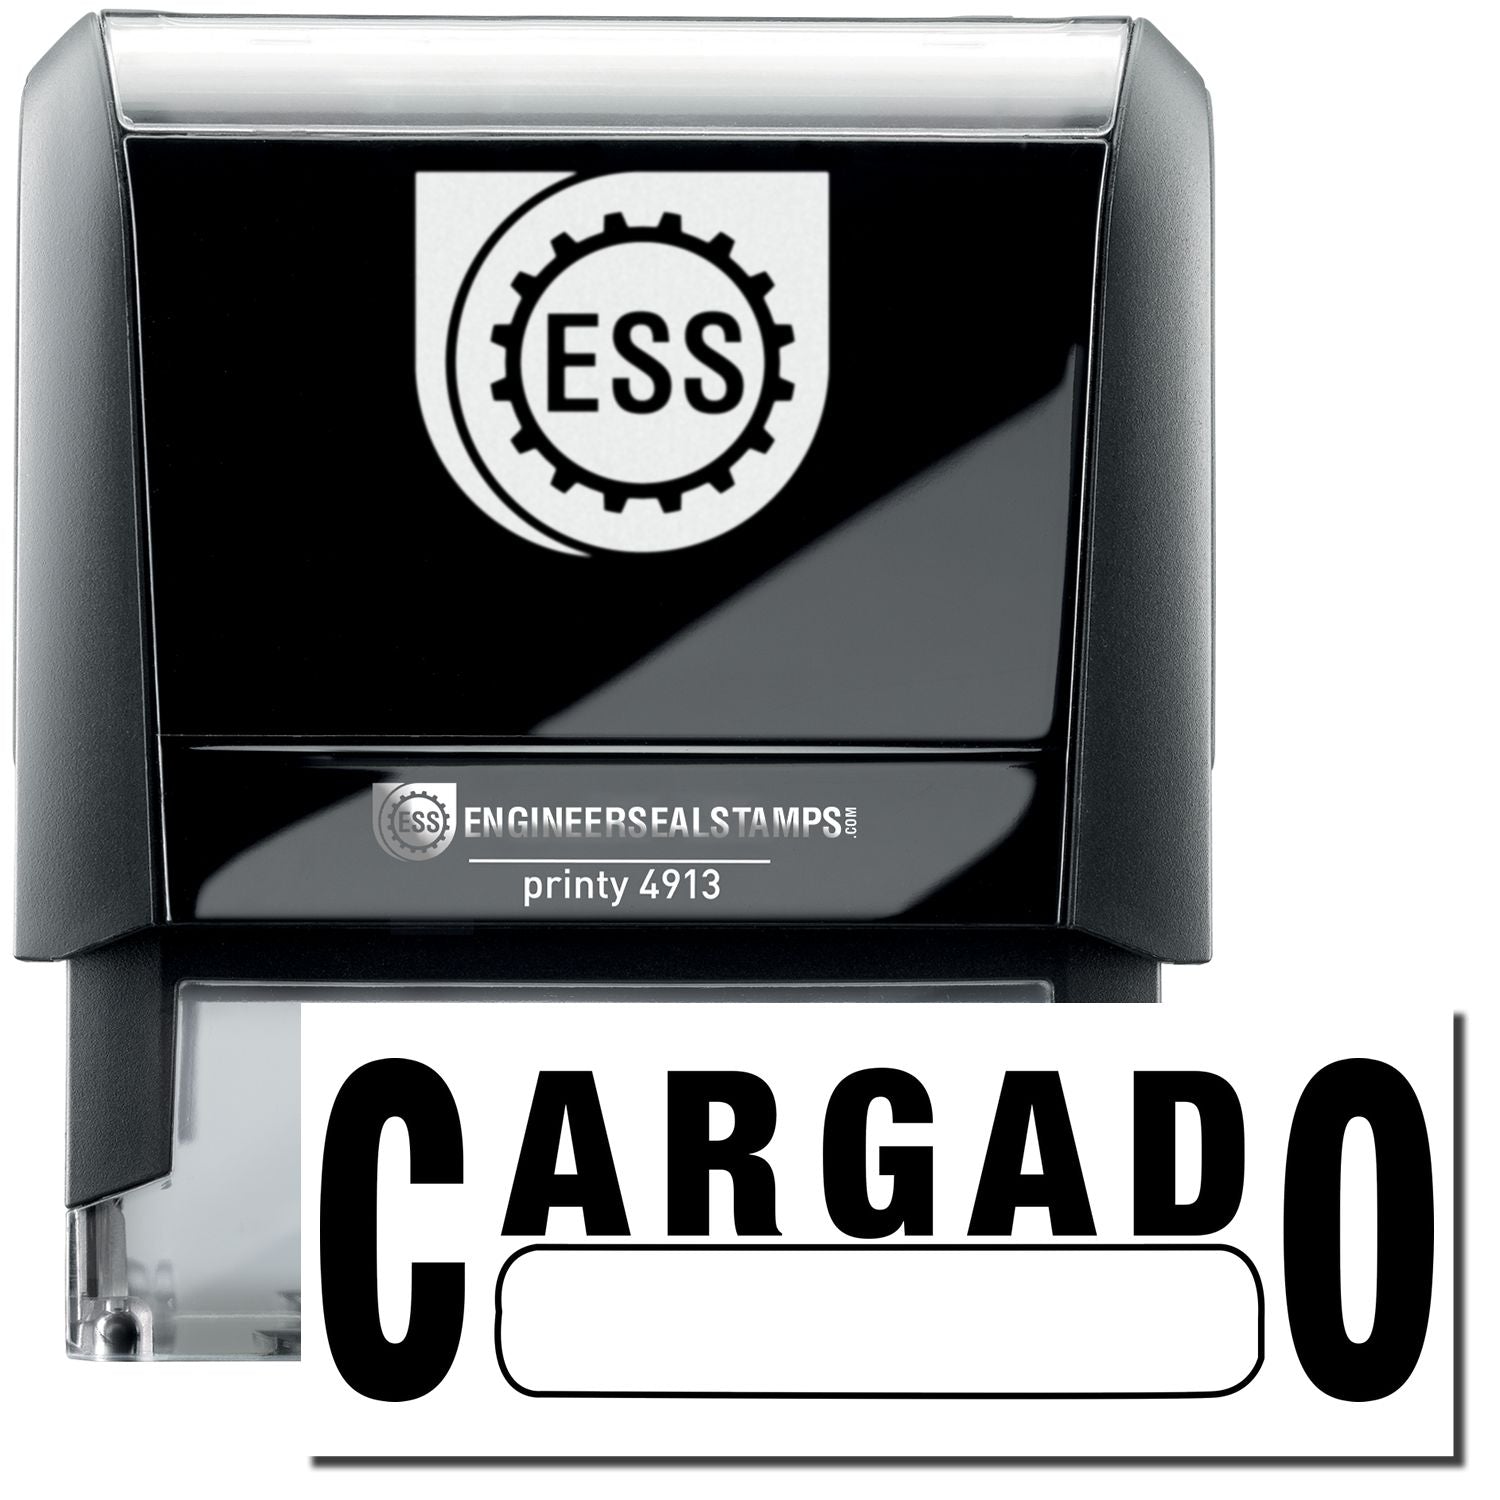 A self-inking stamp with a stamped image showing how the text "CARGADO" (with a box underneath) in a large font is displayed by it after stamping.